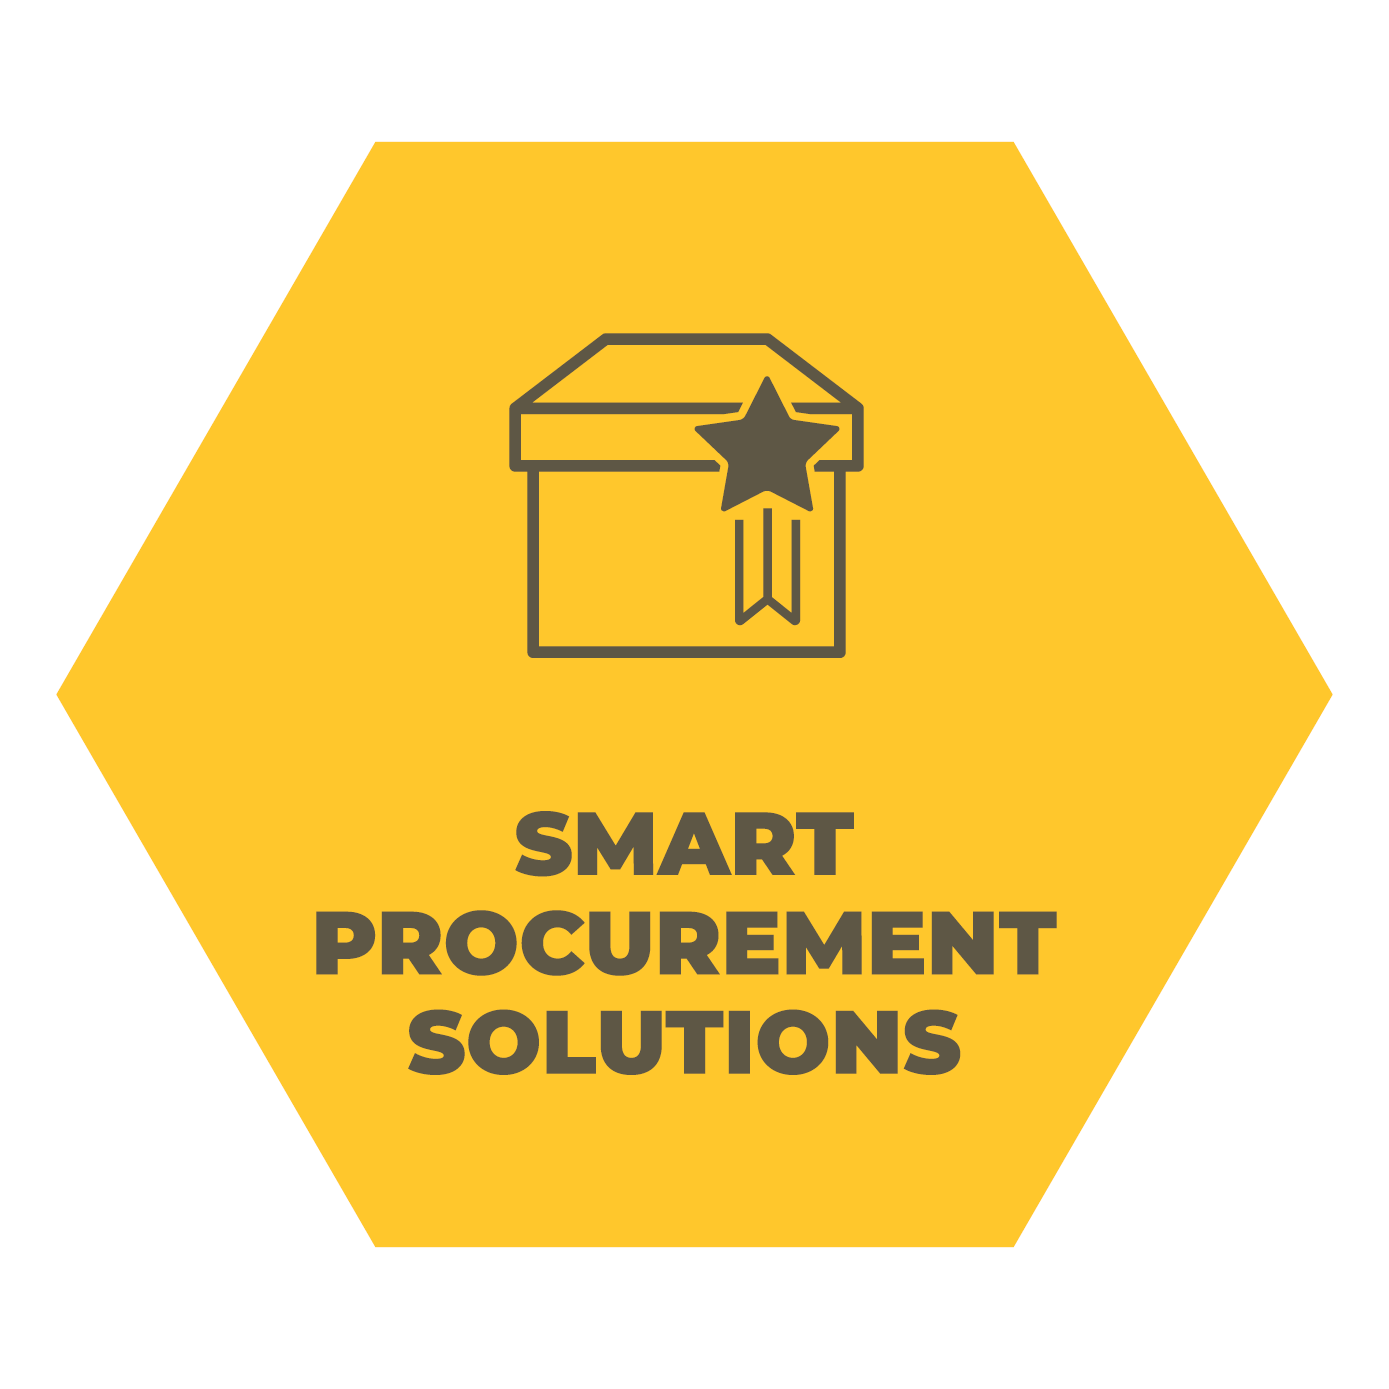 Smart Procurement Solutions at Choice Hotels